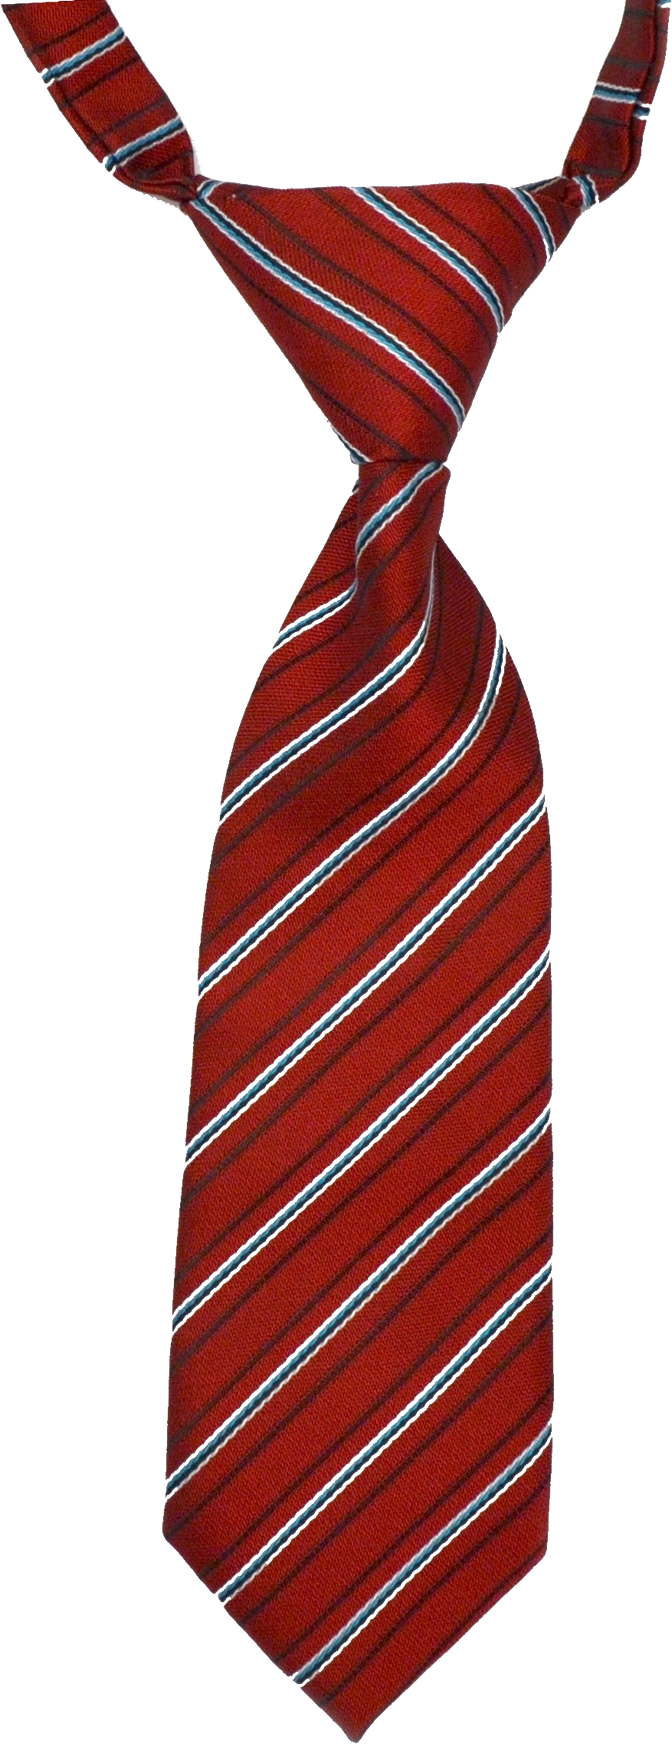 Clip Arts Related To : transparent background necktie clipart. 